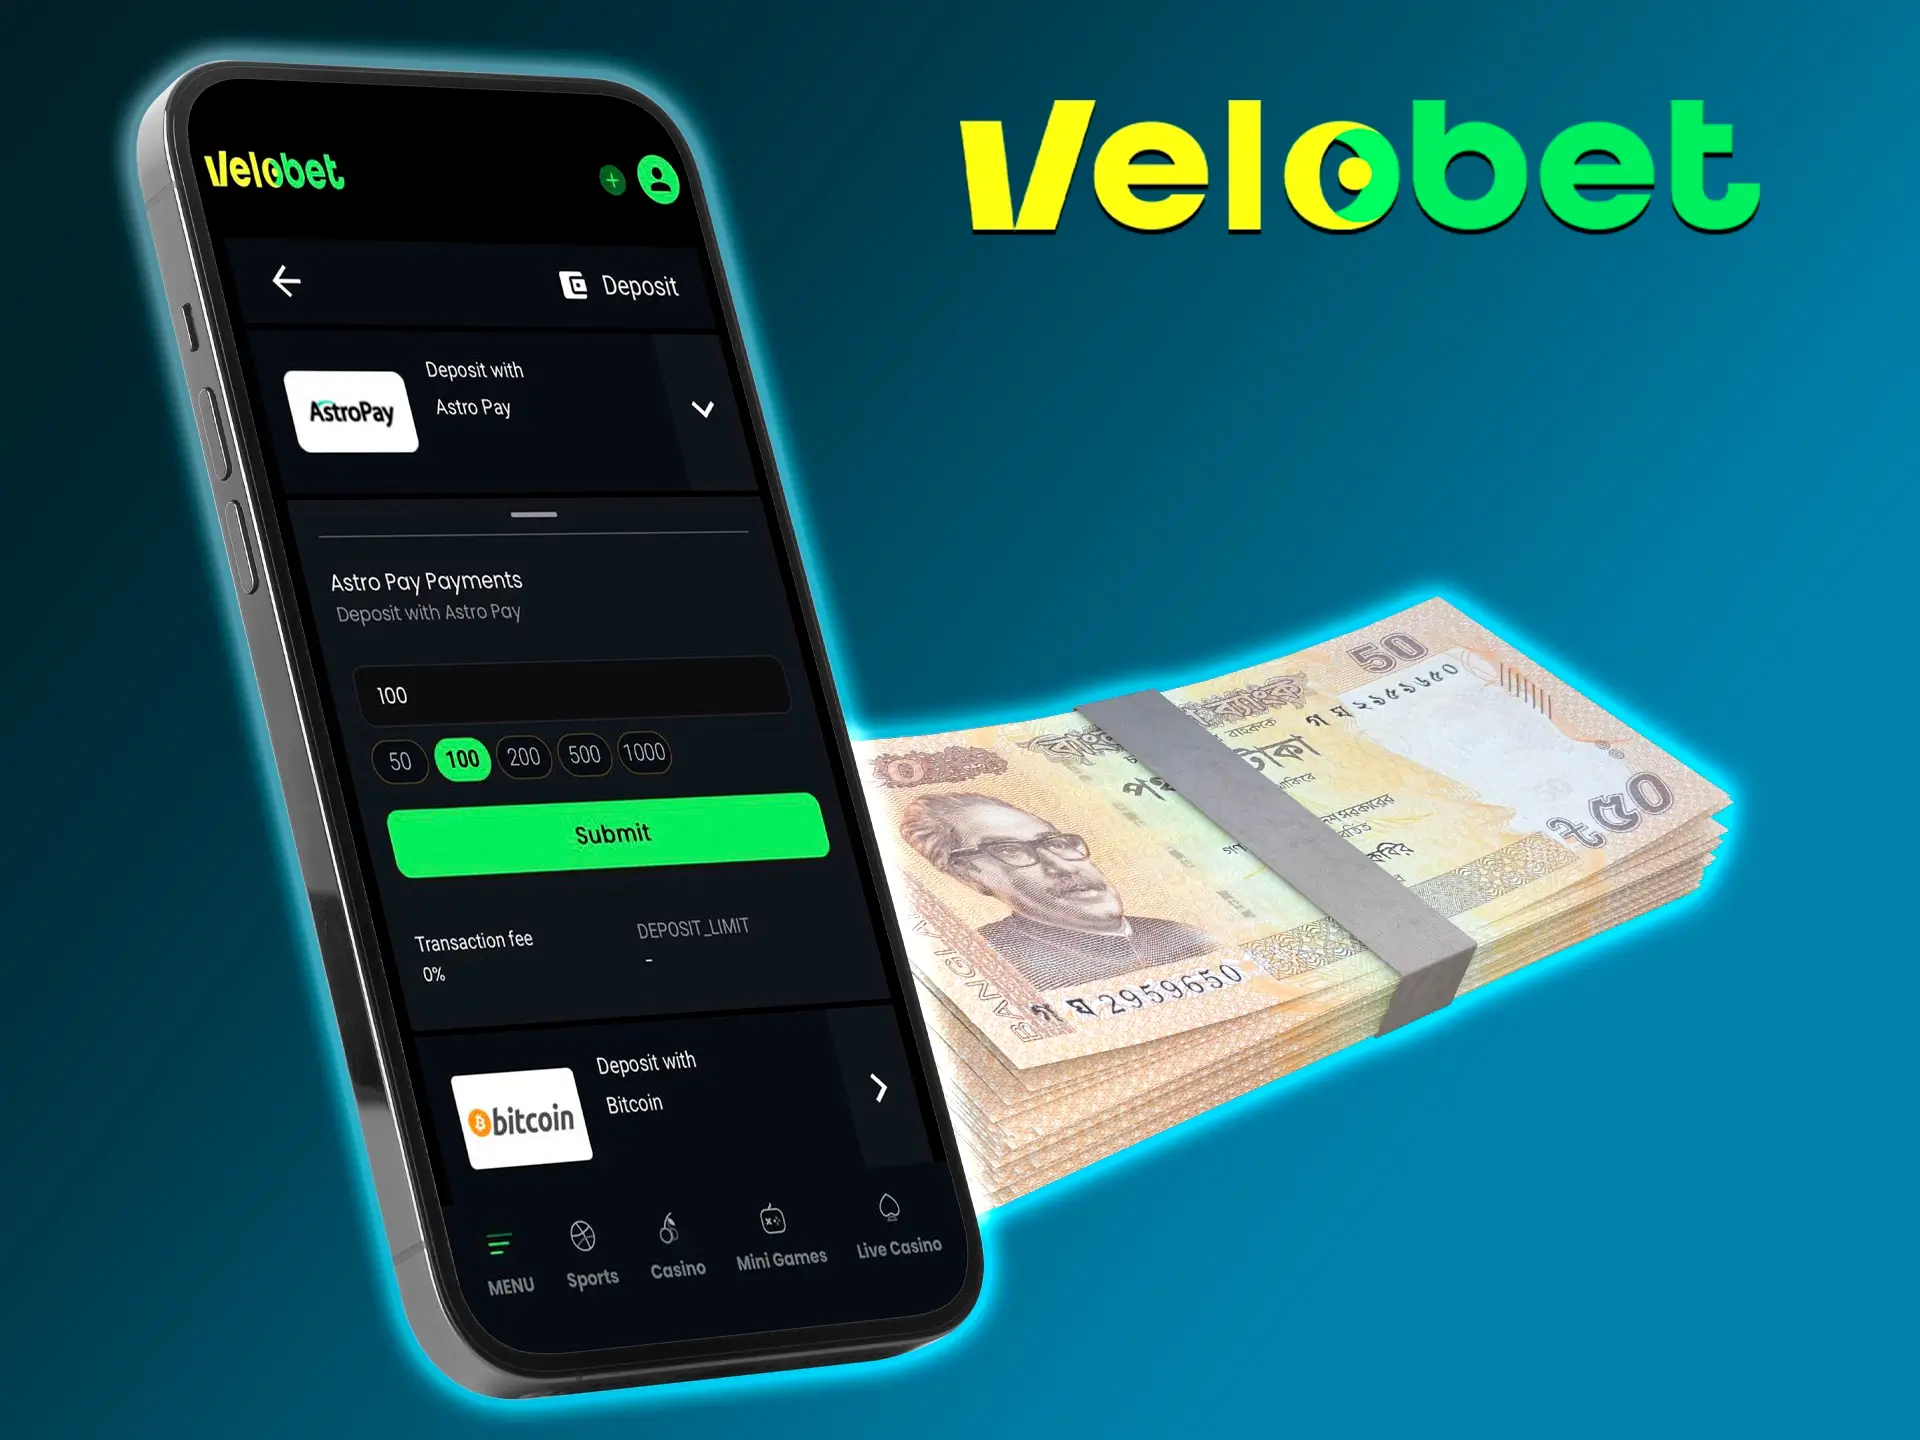 Start your gambling experience at Velobet Casino by making your first deposit.